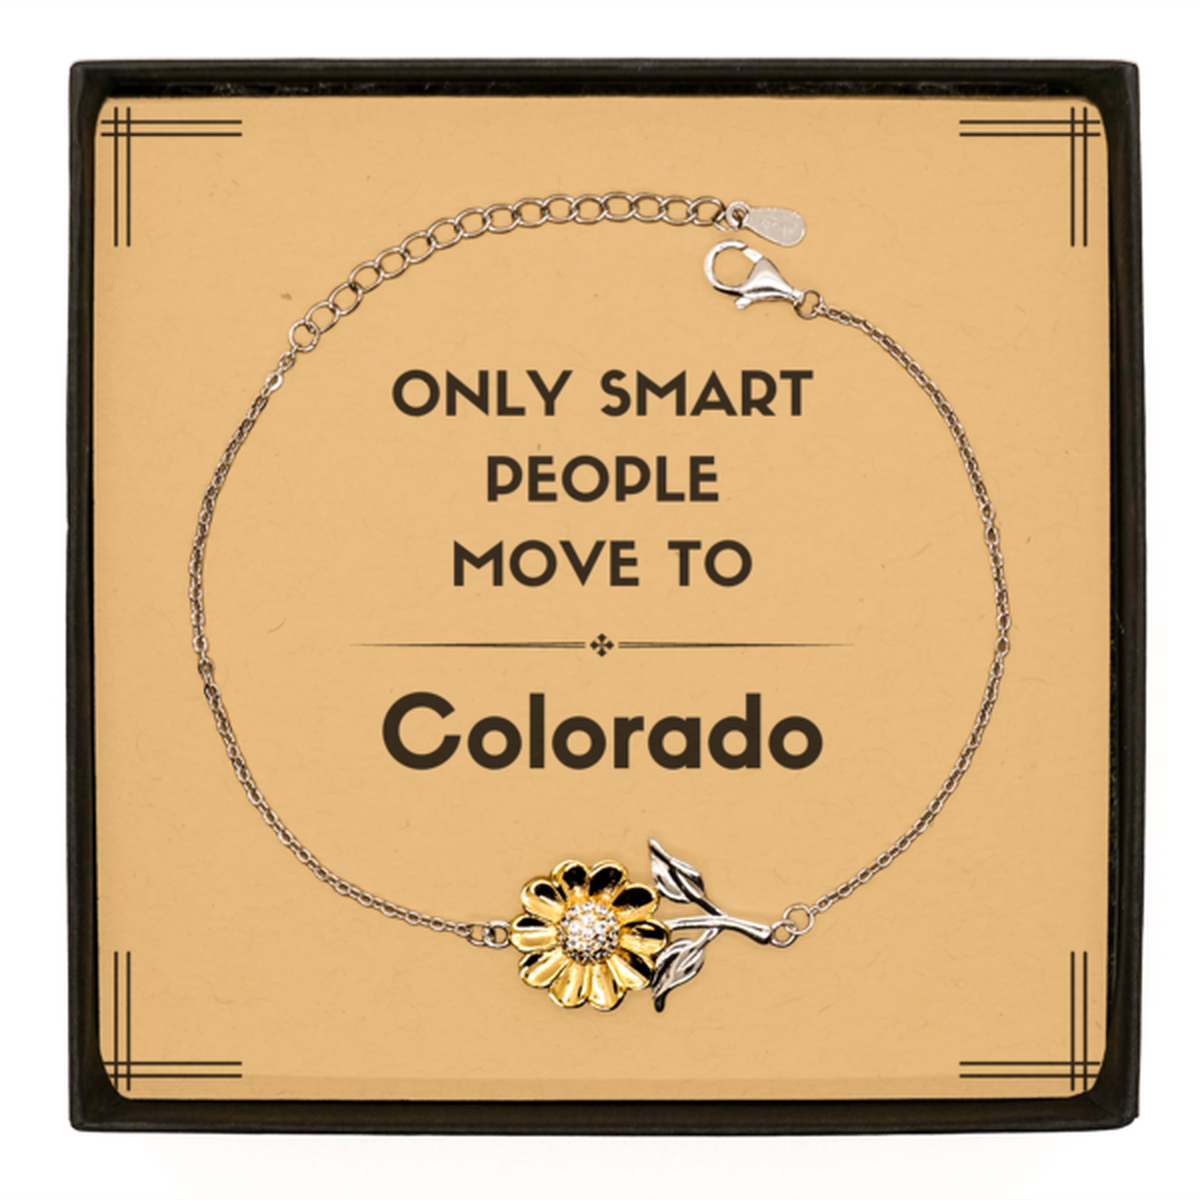 Only smart people move to Colorado Sunflower Bracelet, Message Card Gifts For Colorado, Move to Colorado Gifts for Friends Coworker Funny Saying Quote